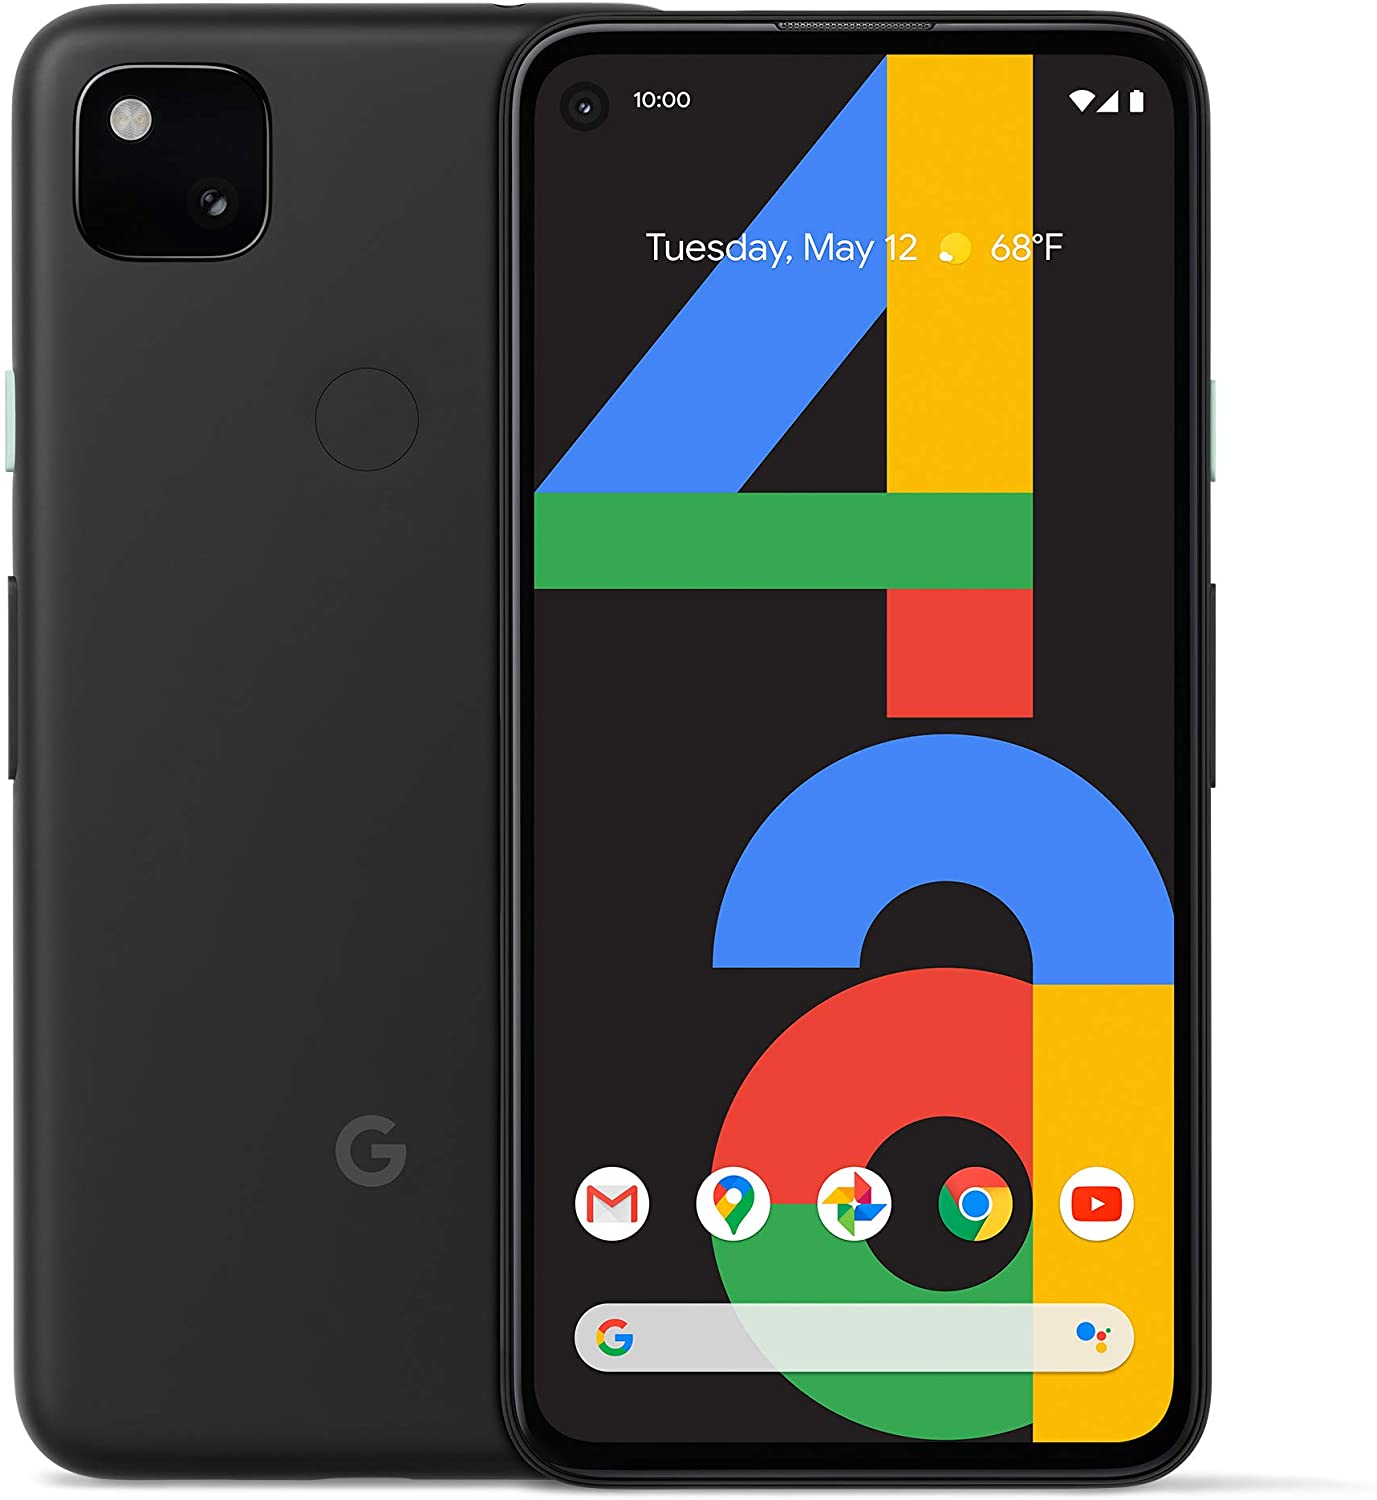 Google Pixel 4a New Unlocked Android Smartphone 128 Gb Back In Stock For Pre Order Amazon 349 99